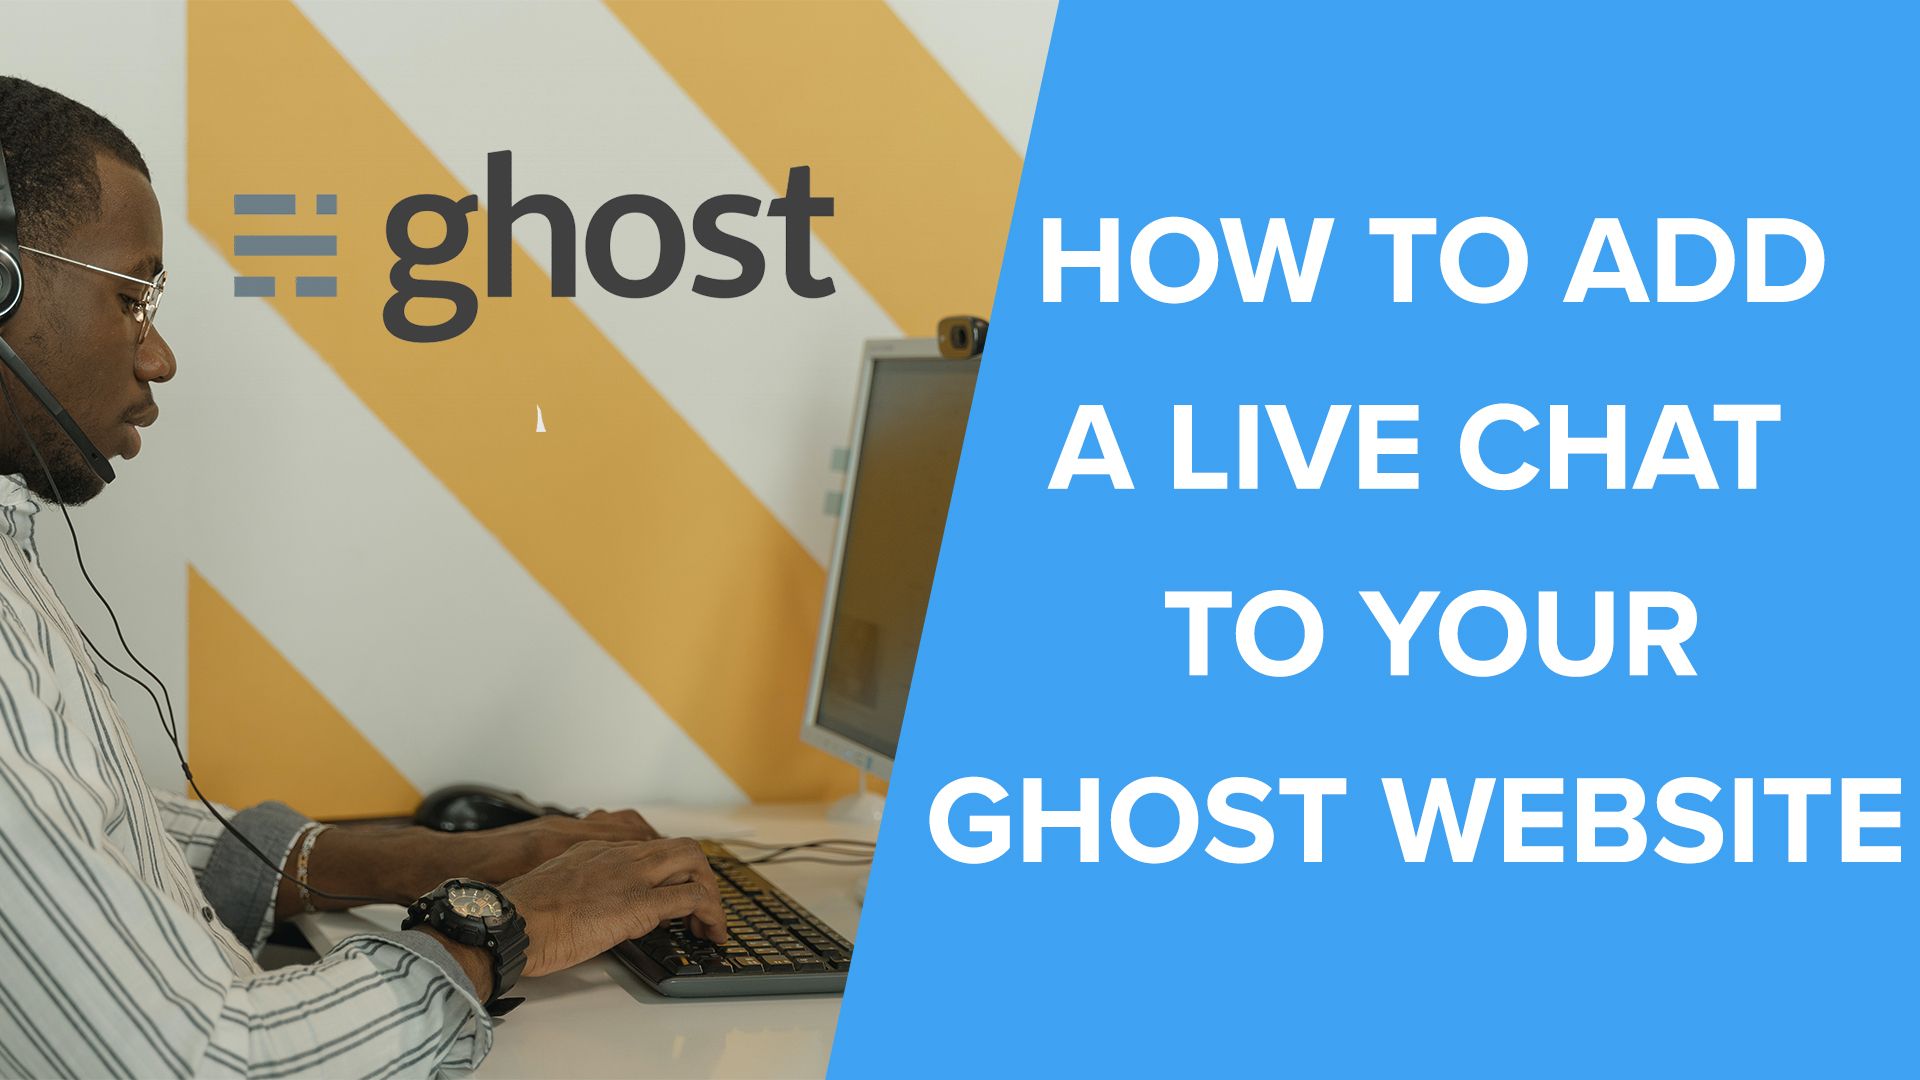 Add a live chat to your Ghost Website in 3 steps